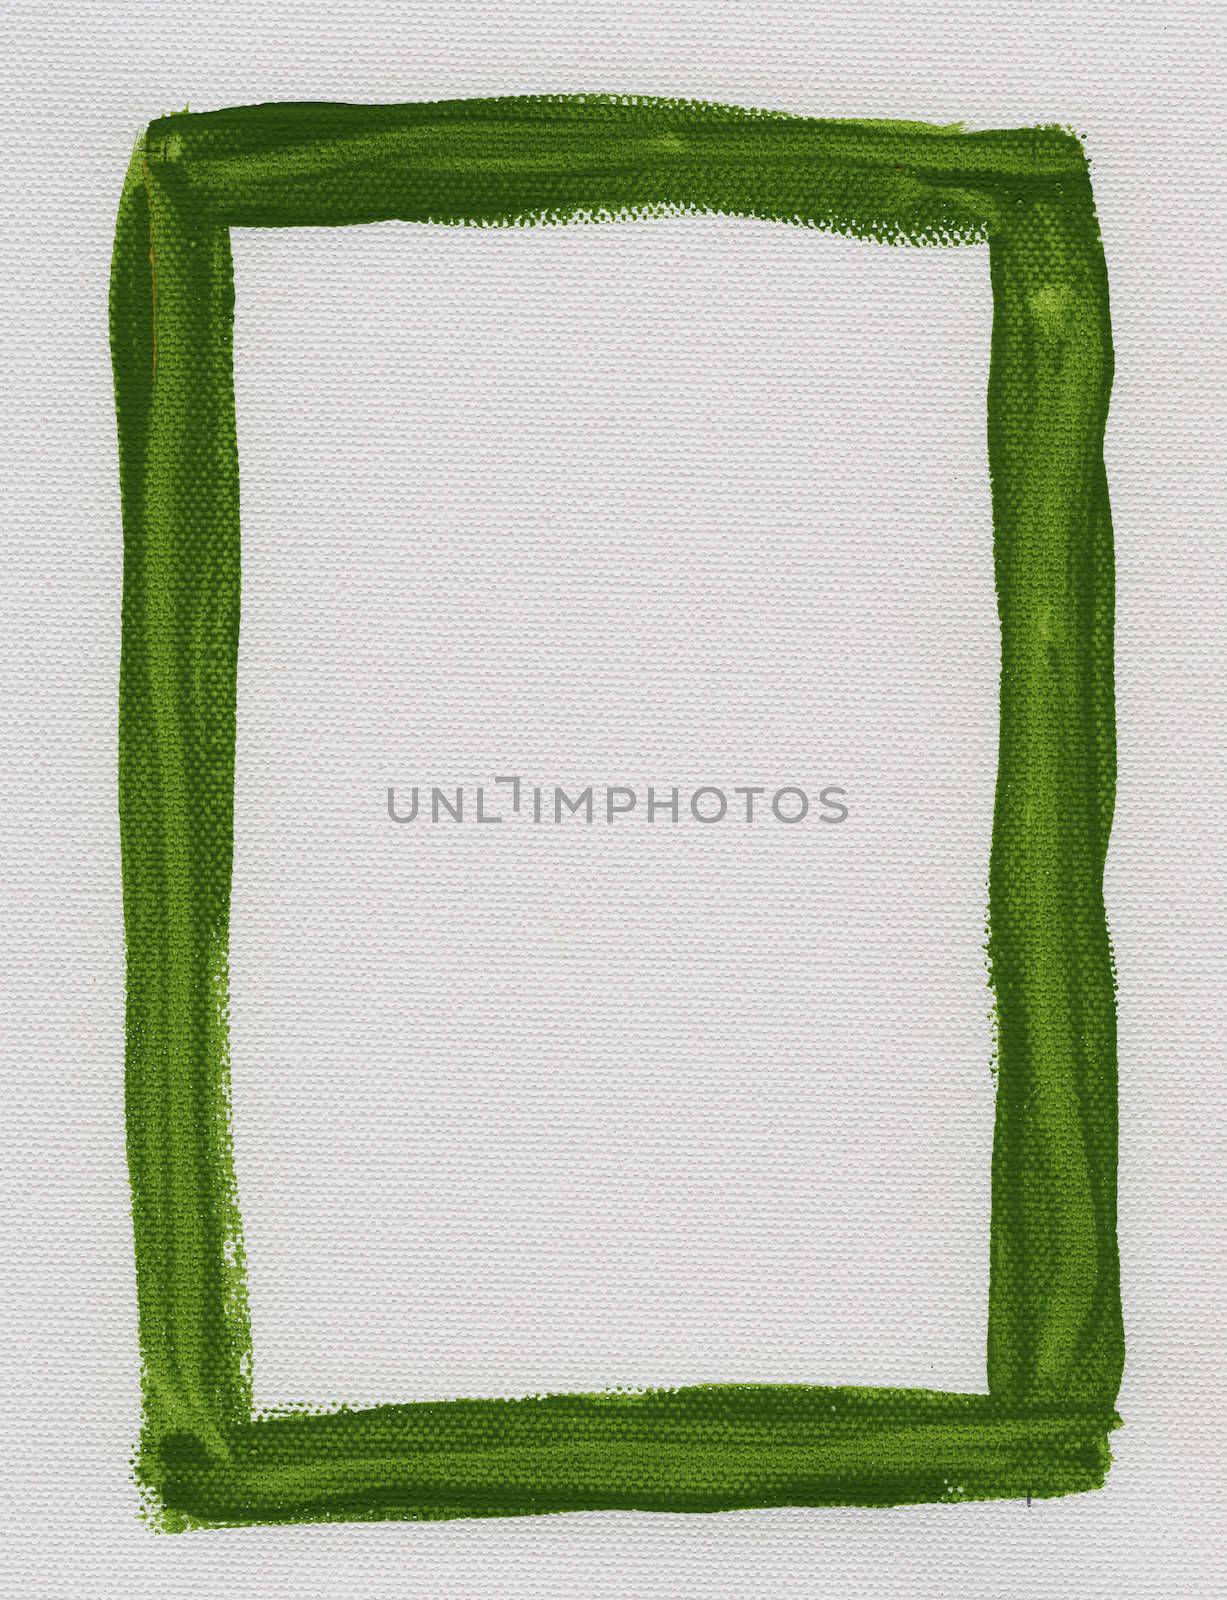 hand painted  green watercolor frame (border) surrounding white blank rectangle on artist canvas with a coarse texture